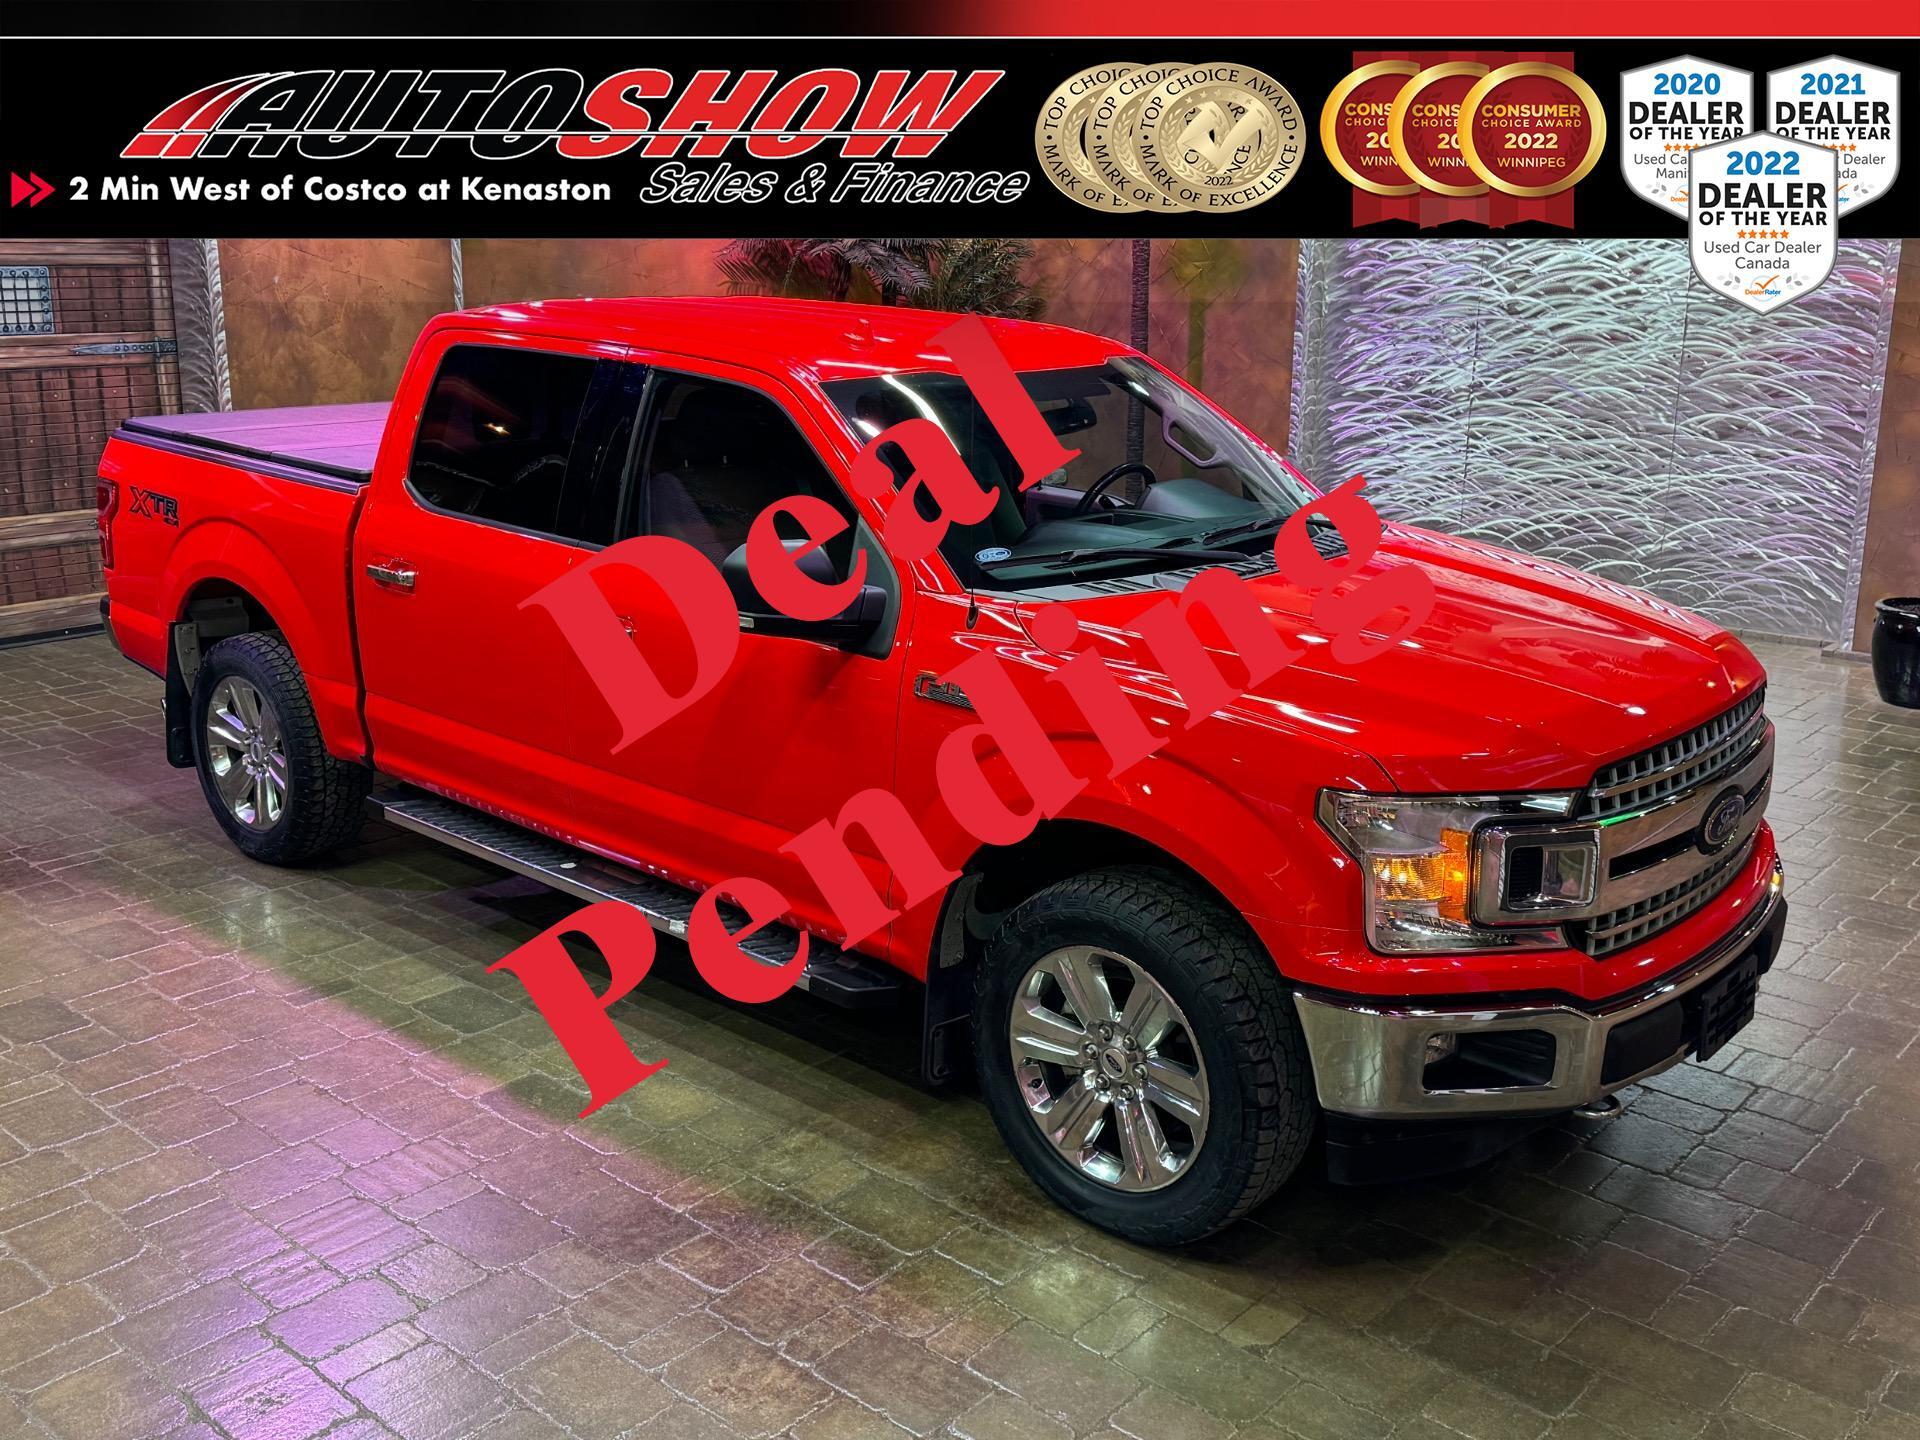 2018 Ford F-150 XTR 5.0 V8 - Htd Seats, Rmt St, 8in Scrn, Tow Pkg!